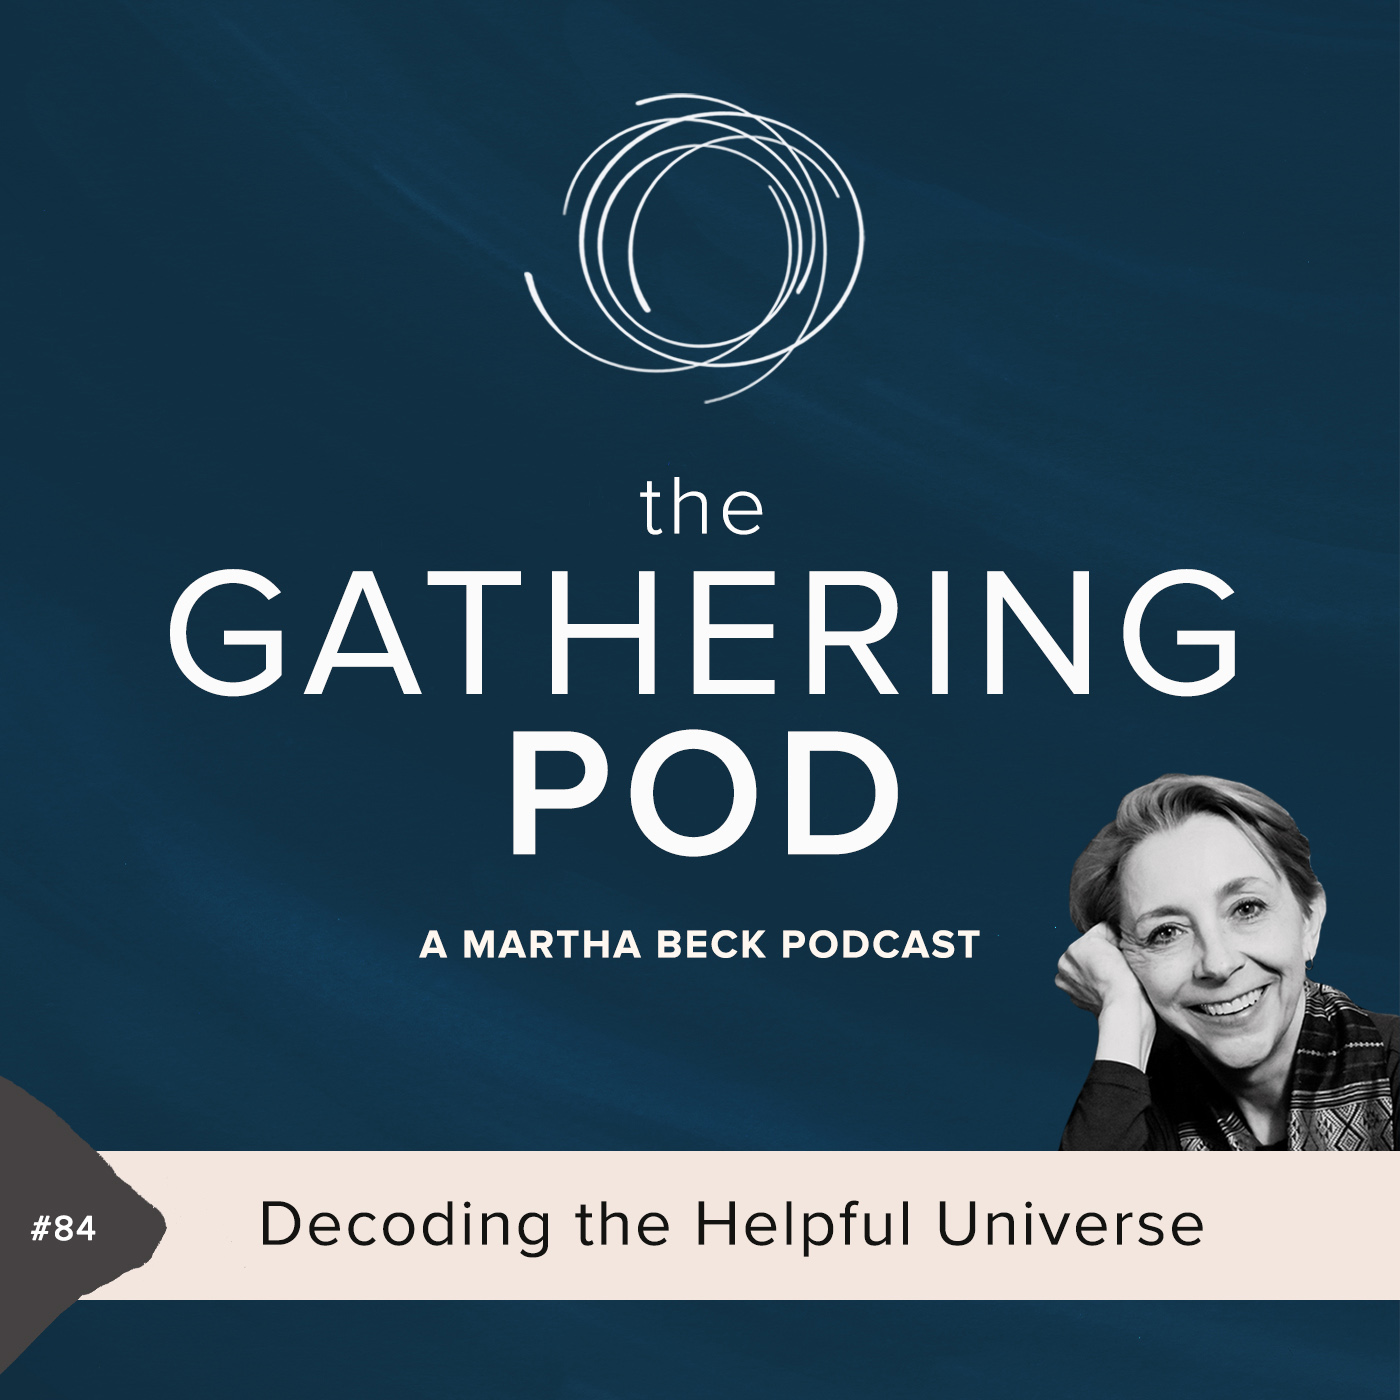 Image for The Gathering Pod A Martha Beck Podcast Episode #84 Decoding the Helpful Universe